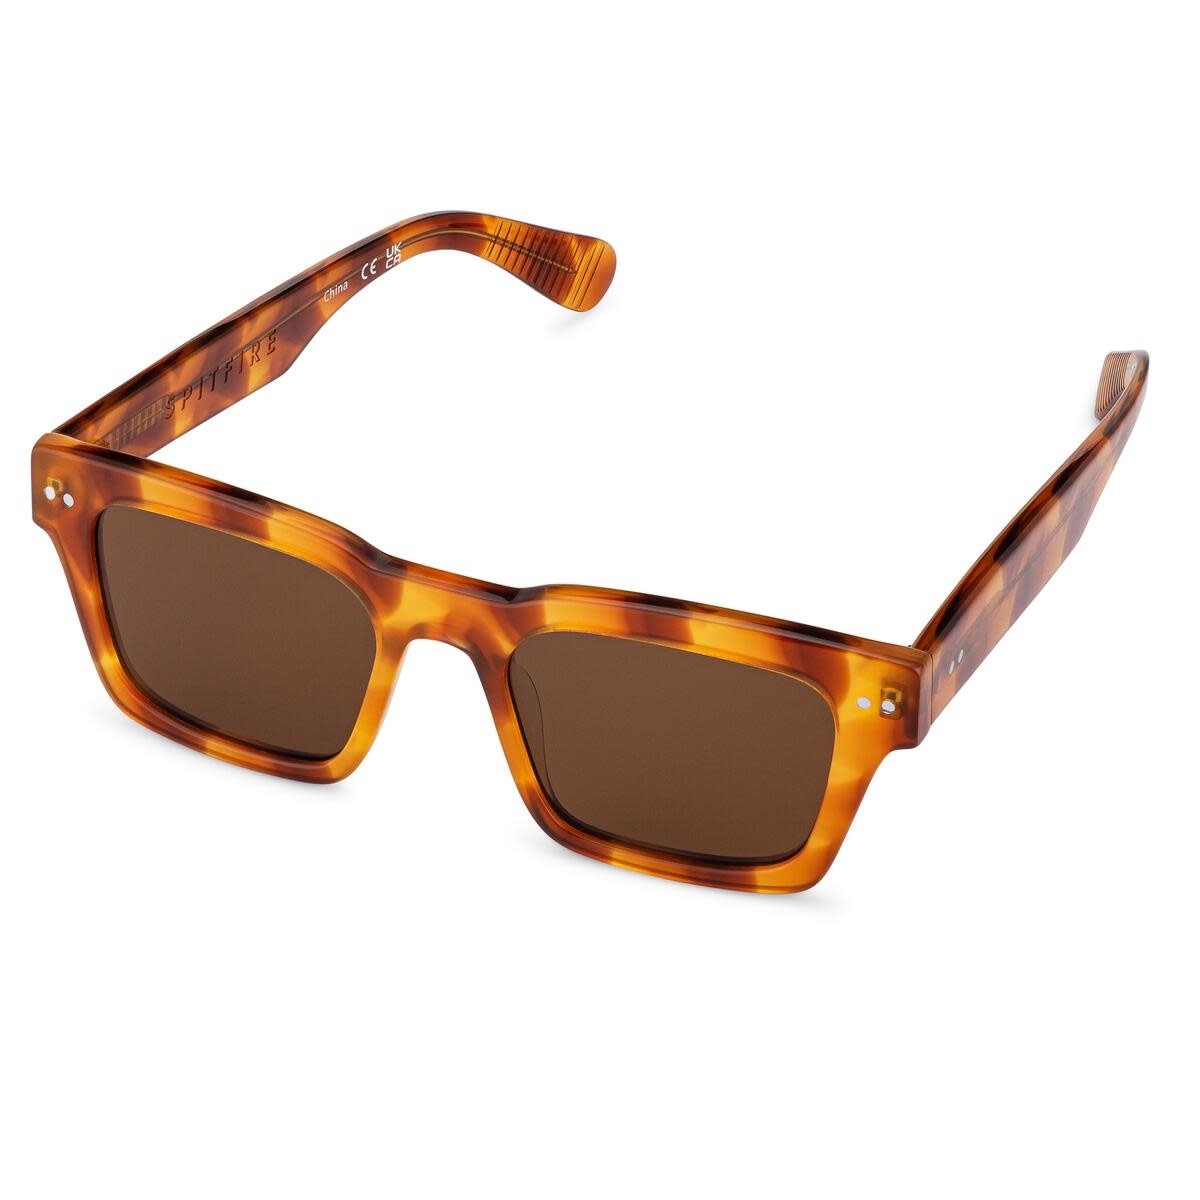 Spitfire Spitfire 62 Cut Sixty Two - Tortoise/Brown